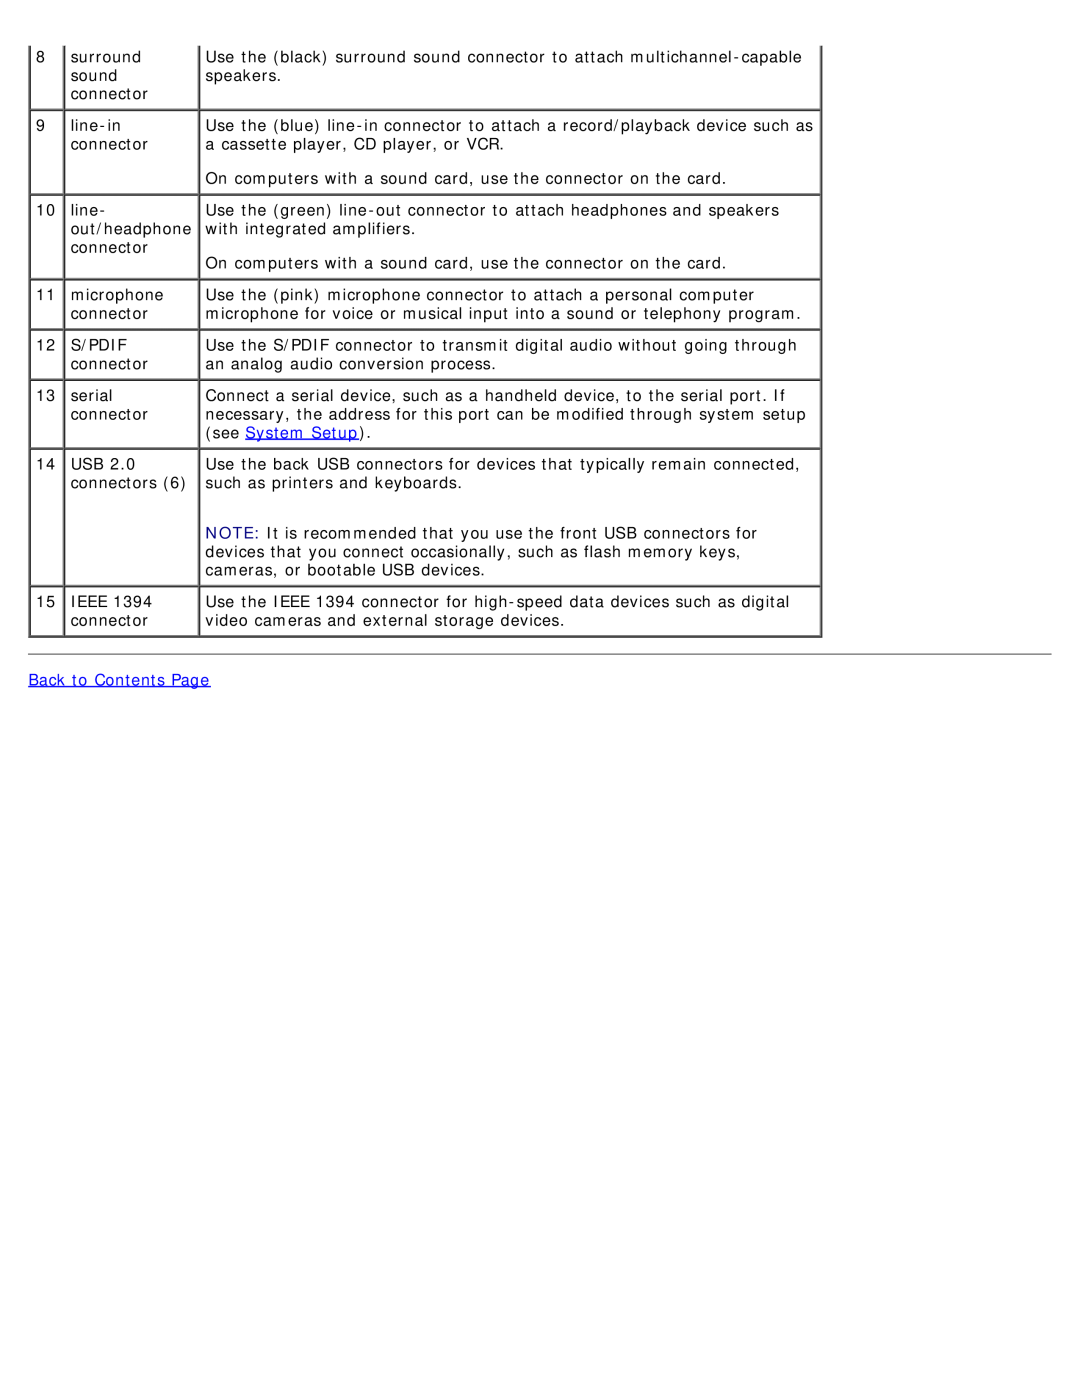 Dell DCDO, 710 H2C service manual see System Setup, Back to Contents Page 